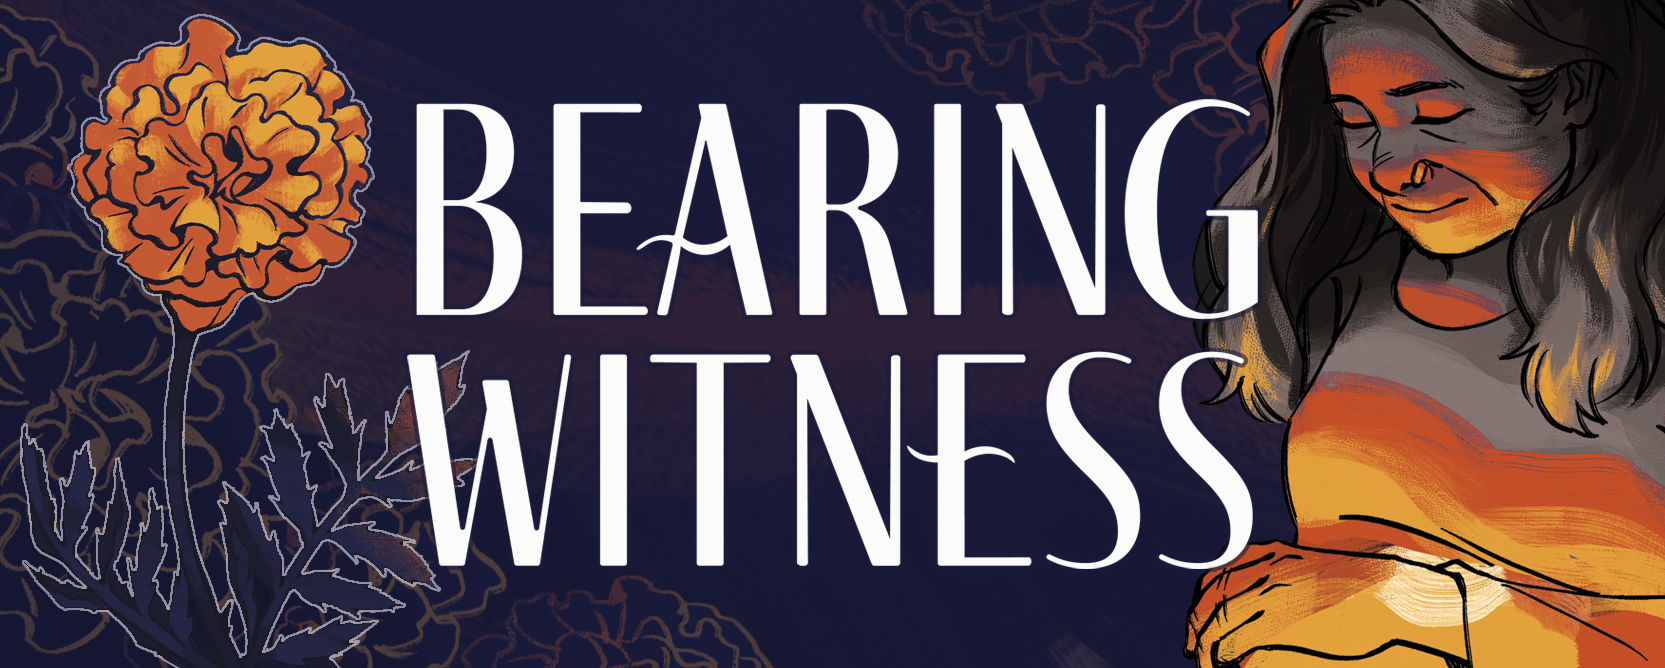 Bearing Witness: A moving graphic novel memoir about a woman in her 40s who comes to terms with pregnancy loss